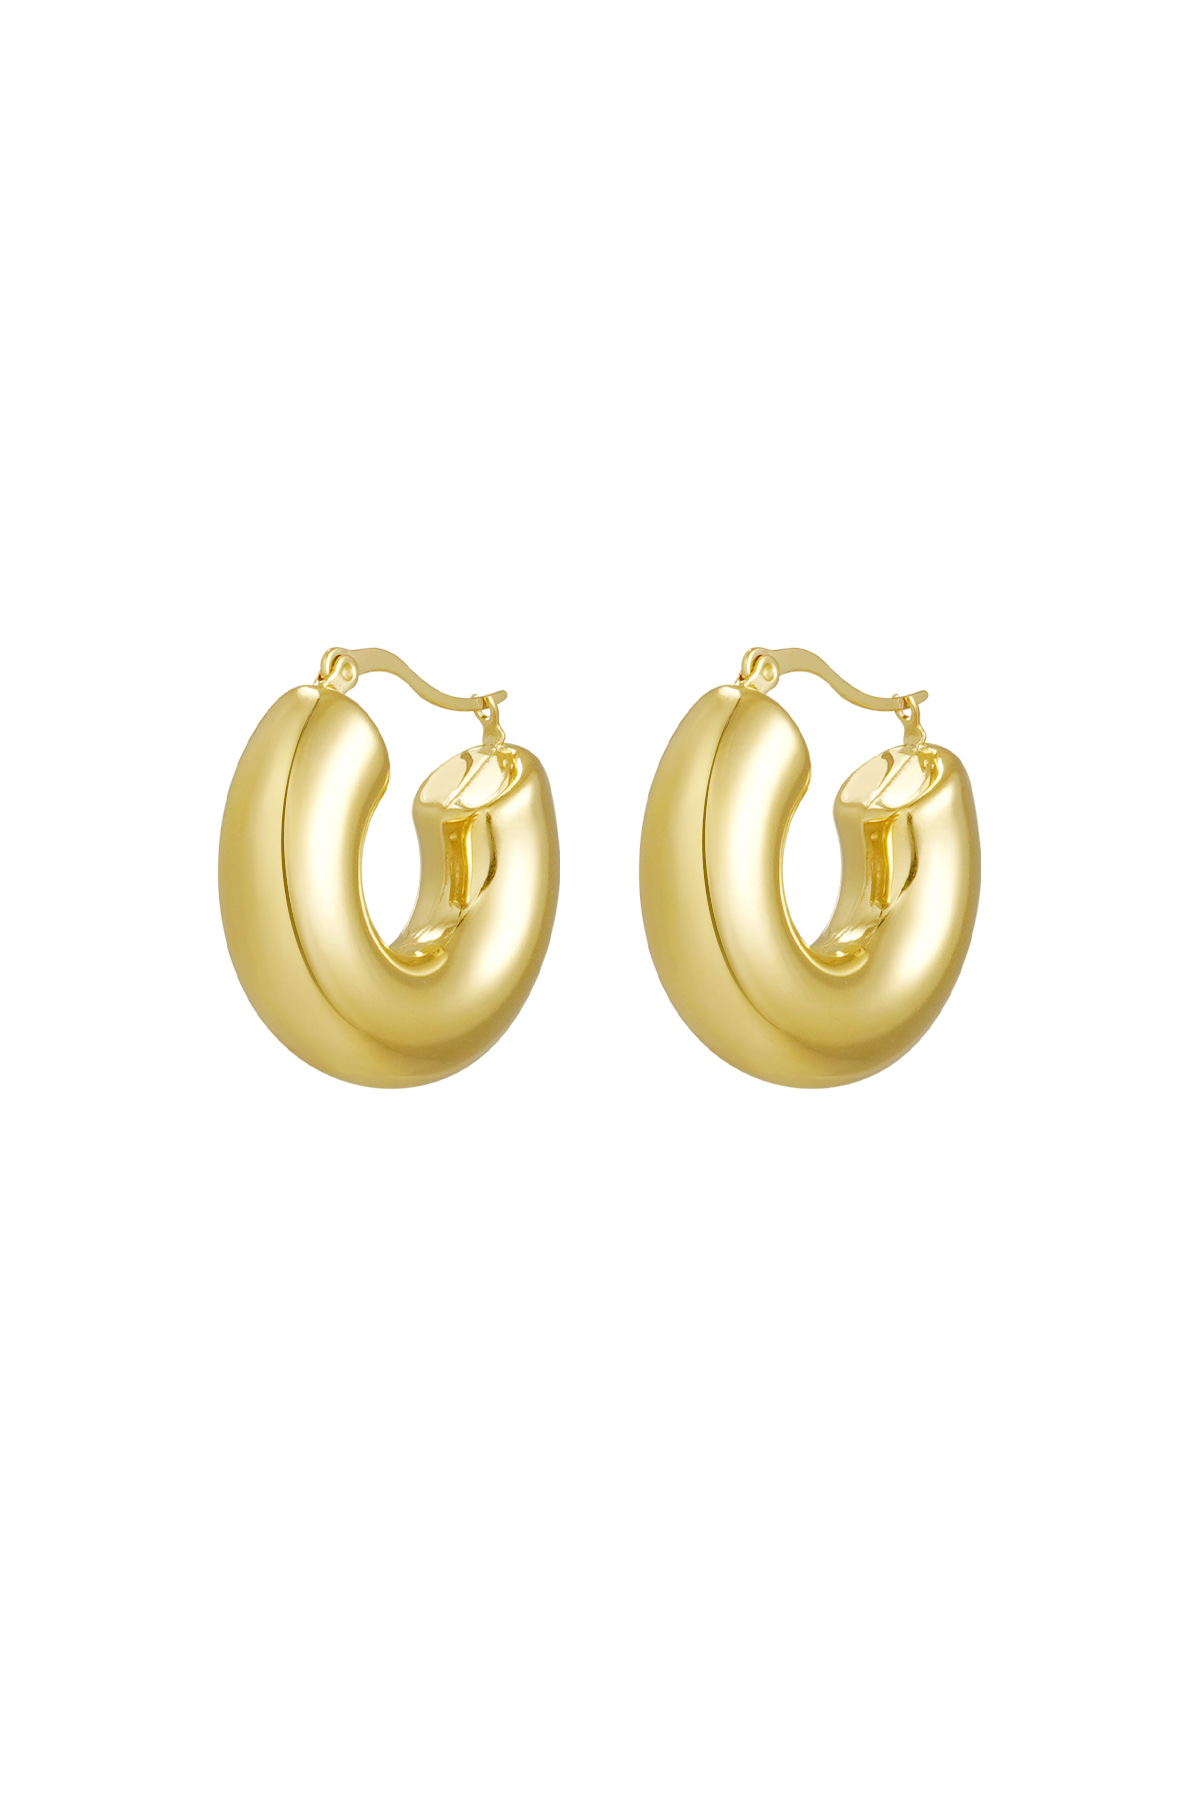 Earrings round thick - gold h5 